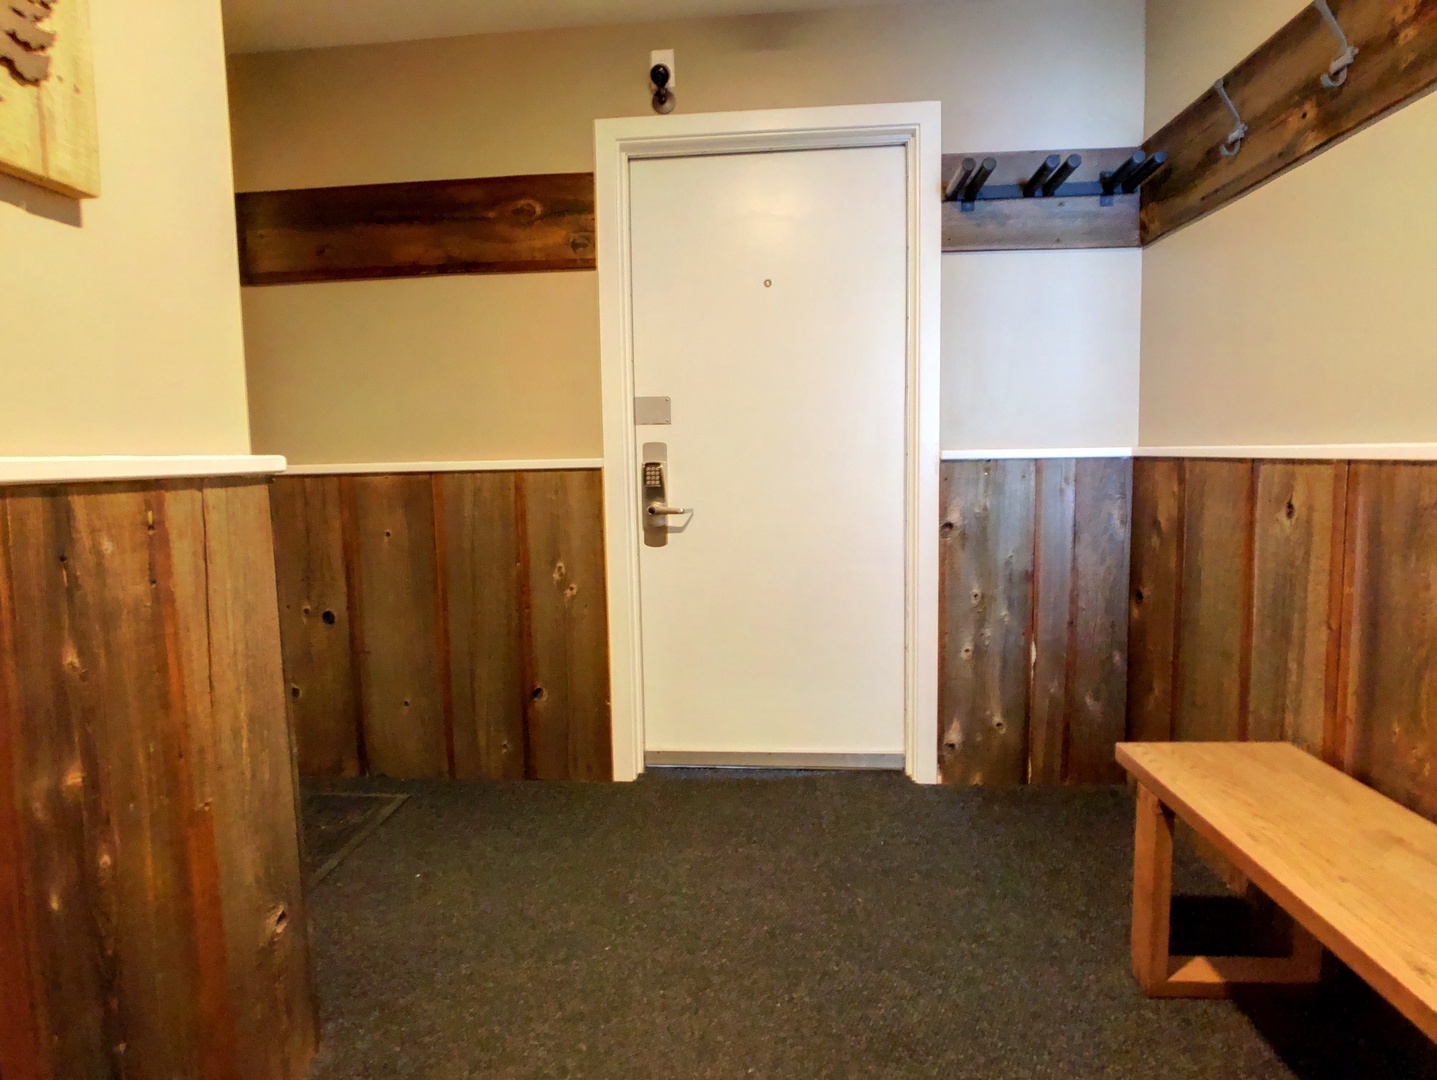 Entryway with ski storage, bench and coat hooks